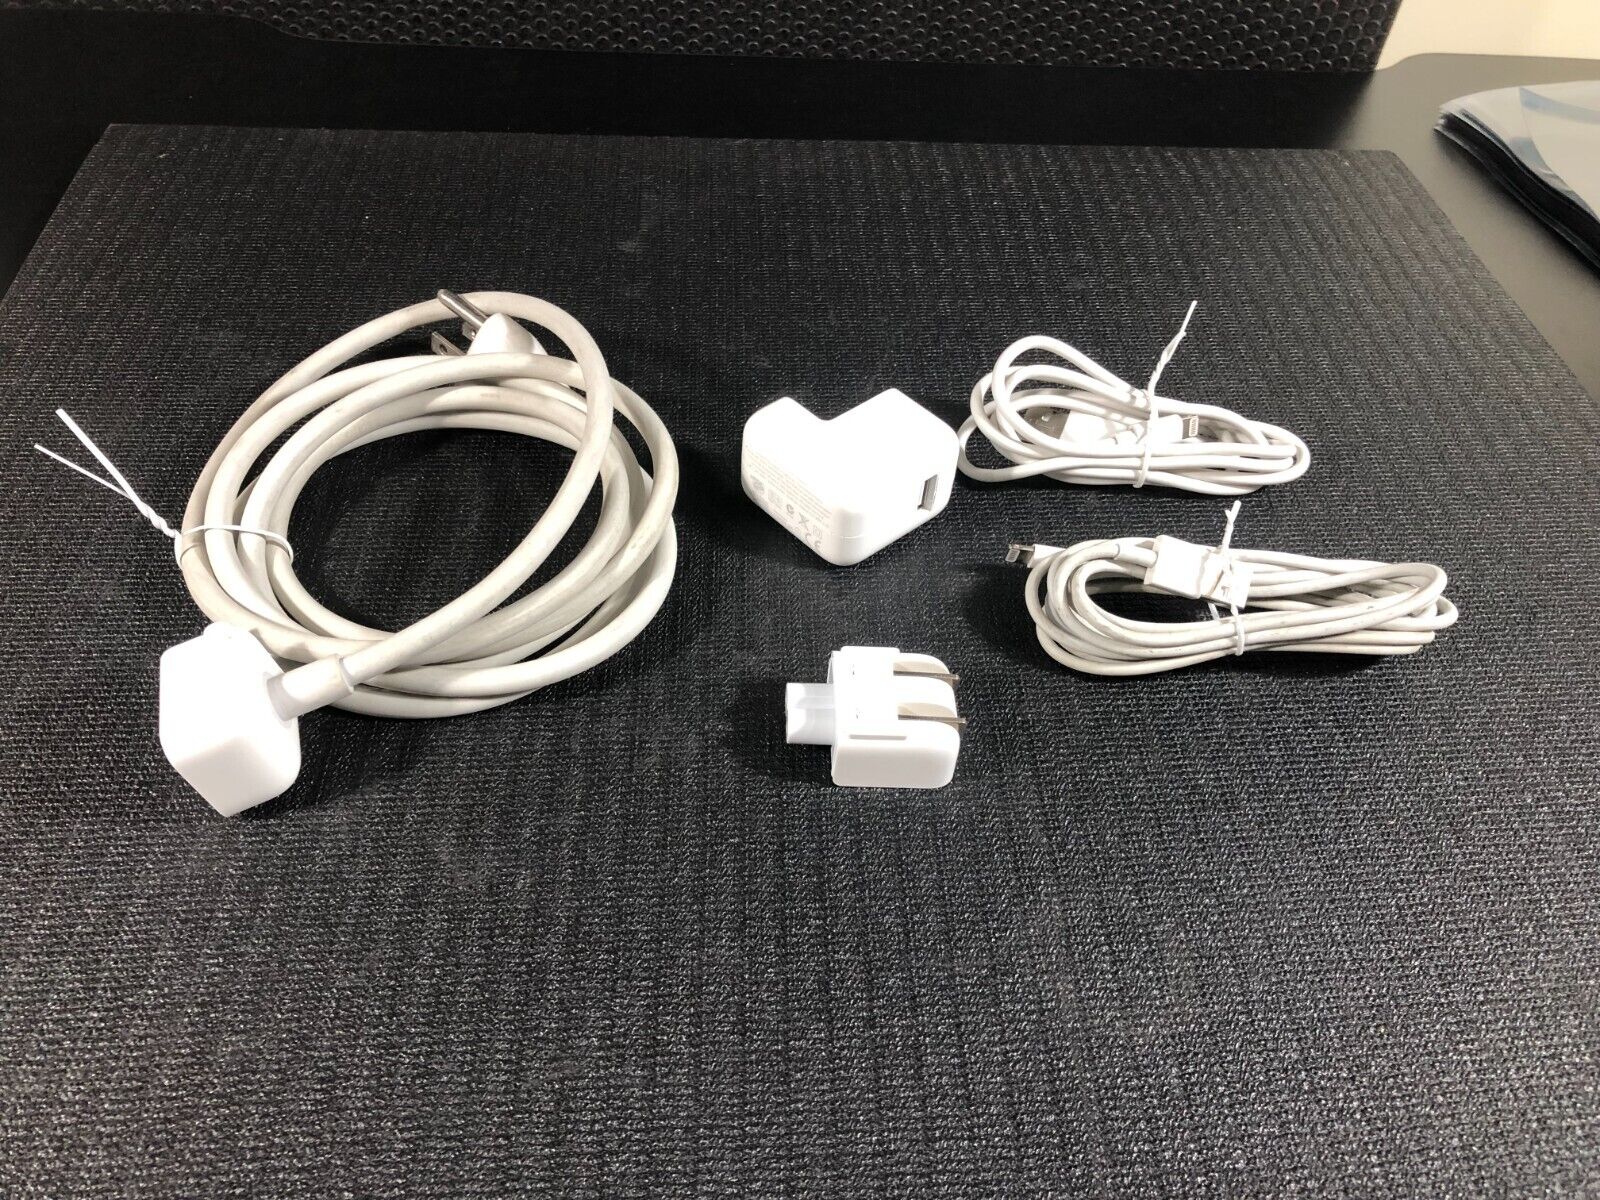 OEM GENUINE APPLE 10W A1357 CHARGER FOR IPHONE IPAD IPOD W/ EXTENSION CORD